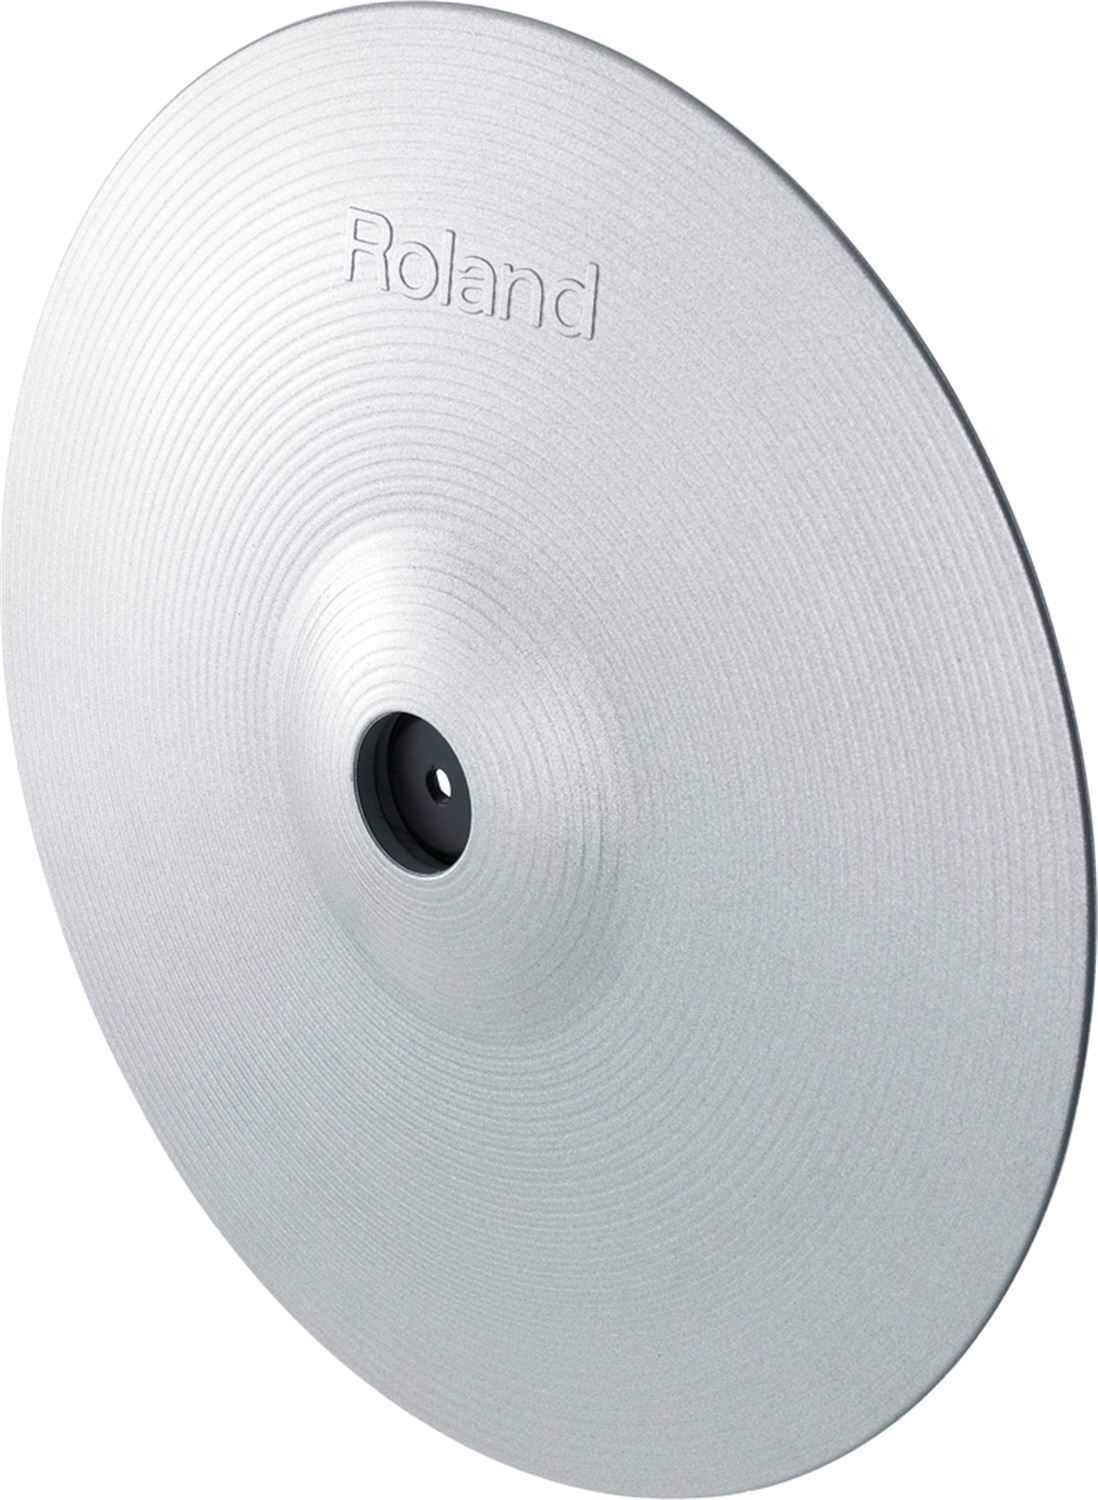 Roland CY-15R-SV 15" V-Cymbal Ride (Silver) - PSSL ProSound and Stage Lighting